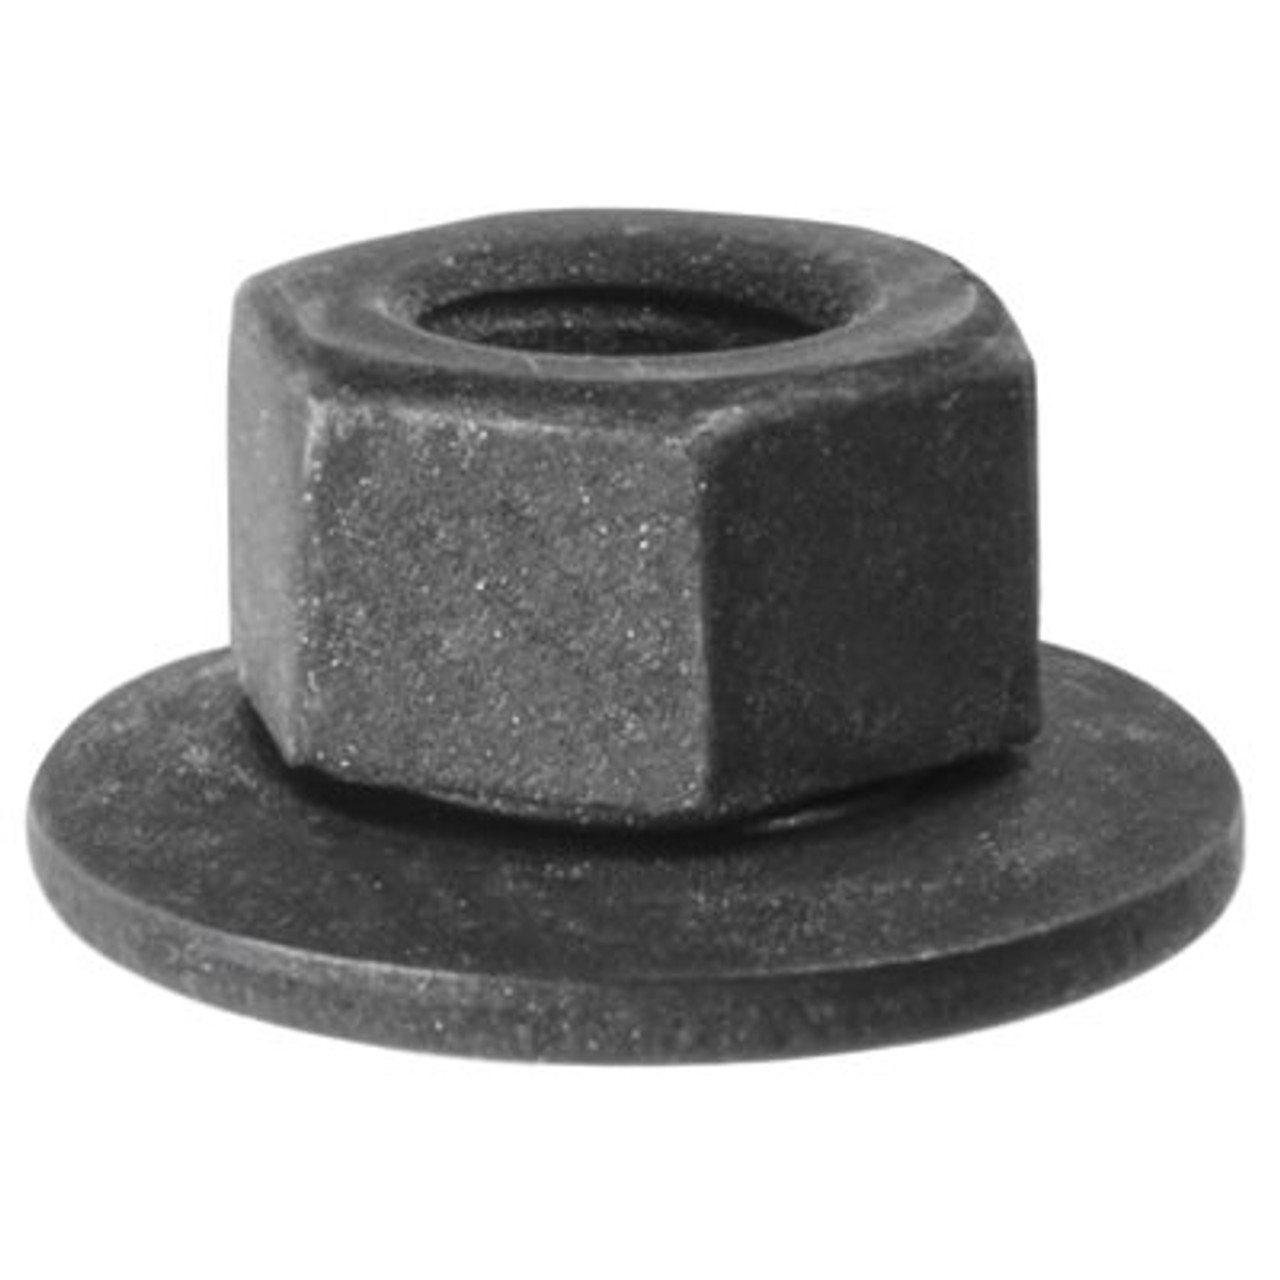 Description : Hex Nut w/Washer
Screw Size : M6
Finish : Black
Across Flats : 10MM
Washer Diameter : 16MM
Class : 9
OEM Number : (N90100001 ; 11505329)
Pcs/Unit: 50
Country: TW
Catalog Page #: 109